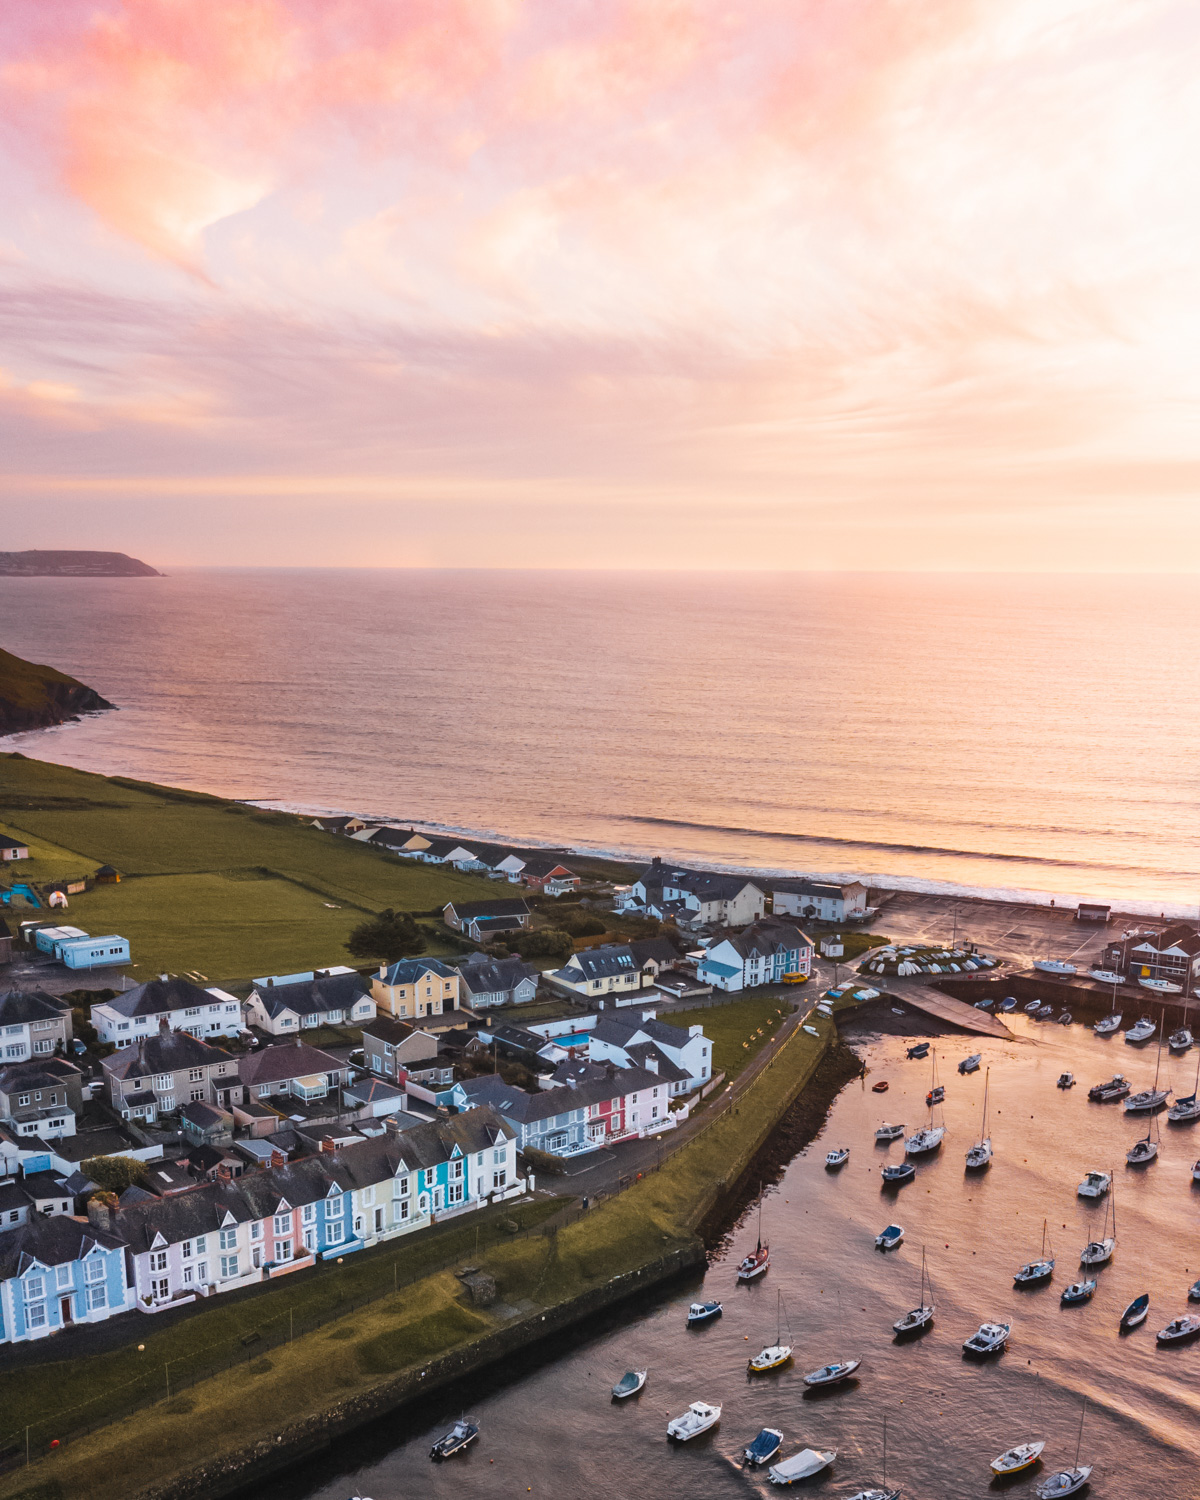 Aberaeron harbour drone sunset // The Most Beautiful Places to Visit in Wales // #readysetjetset #wales #uk #welsh #travel #photospots #blogpost